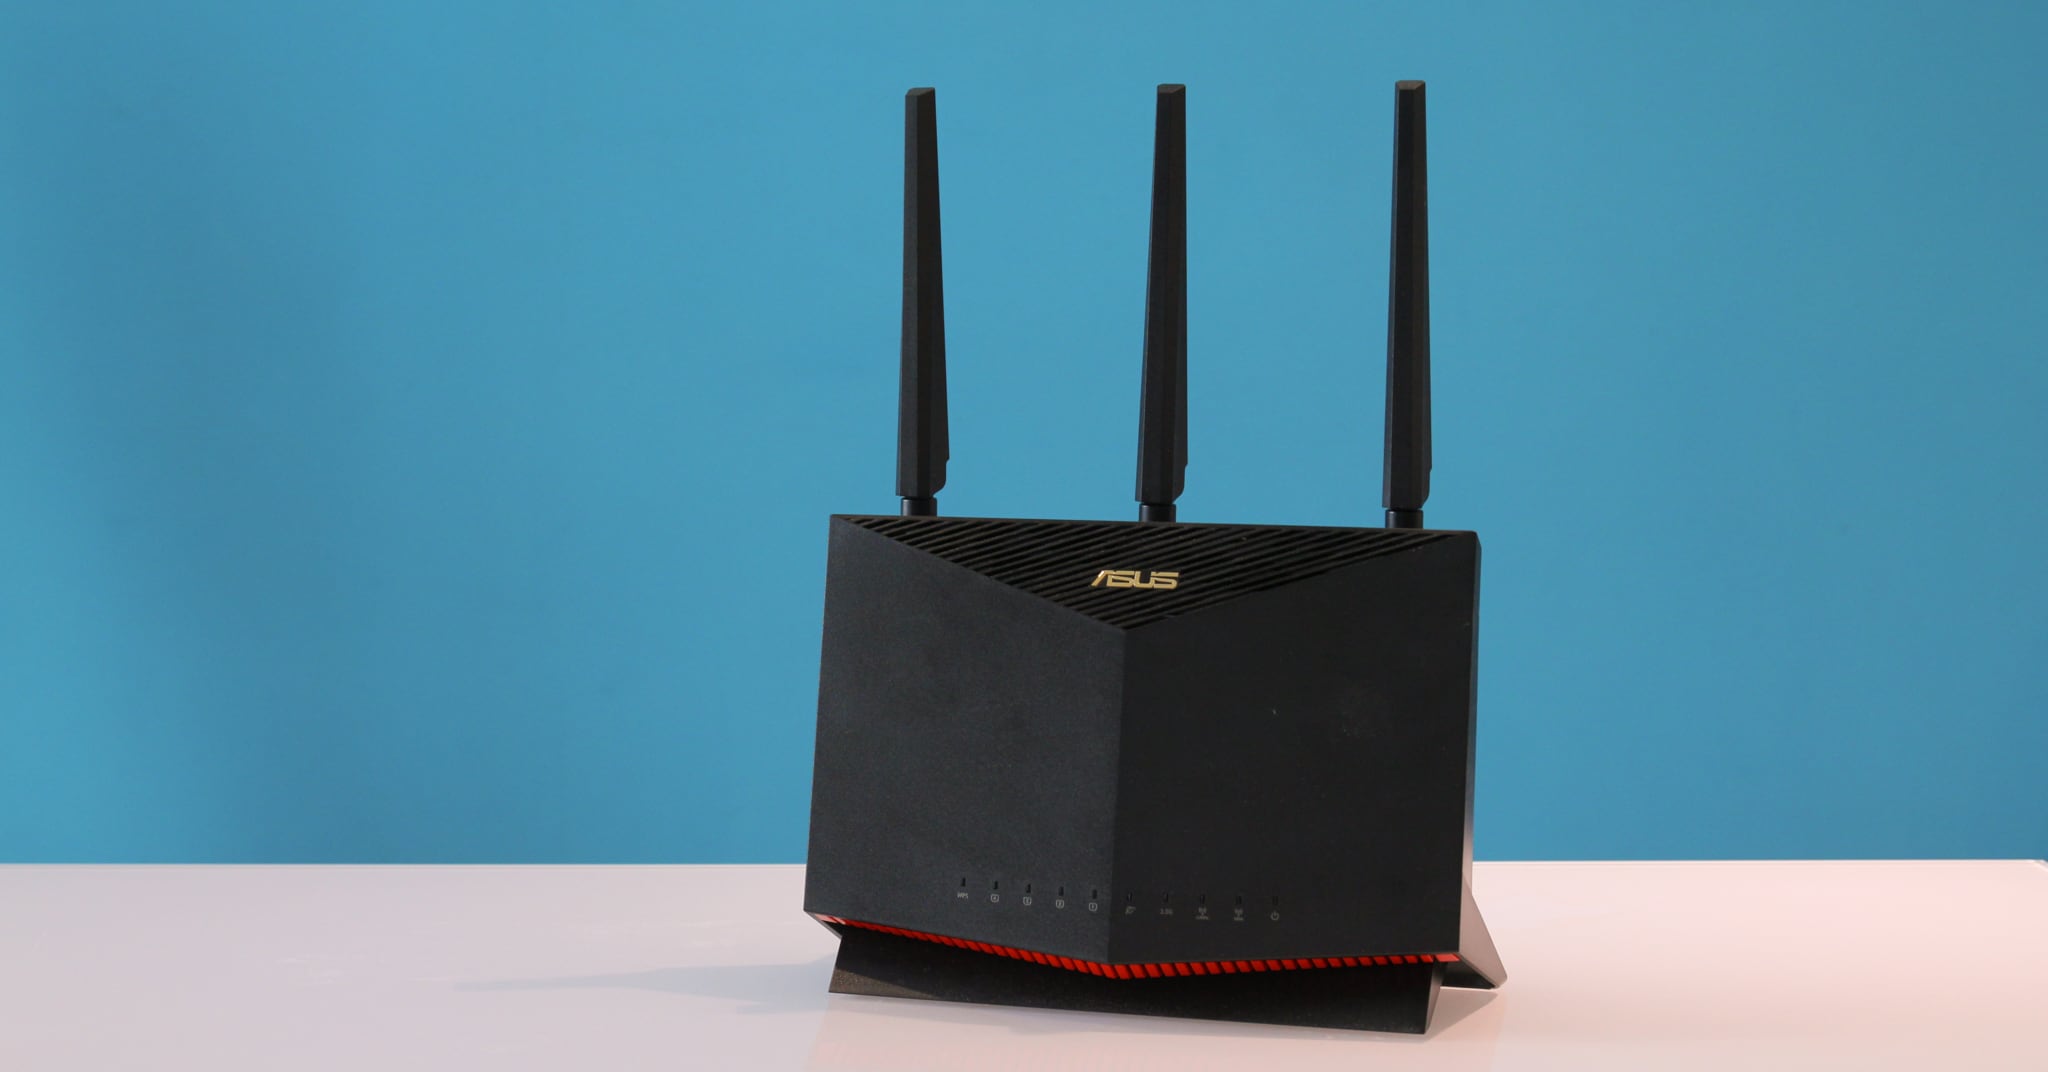 ASUS RT-AX86U Review: High performance AX5700 WiFi 6